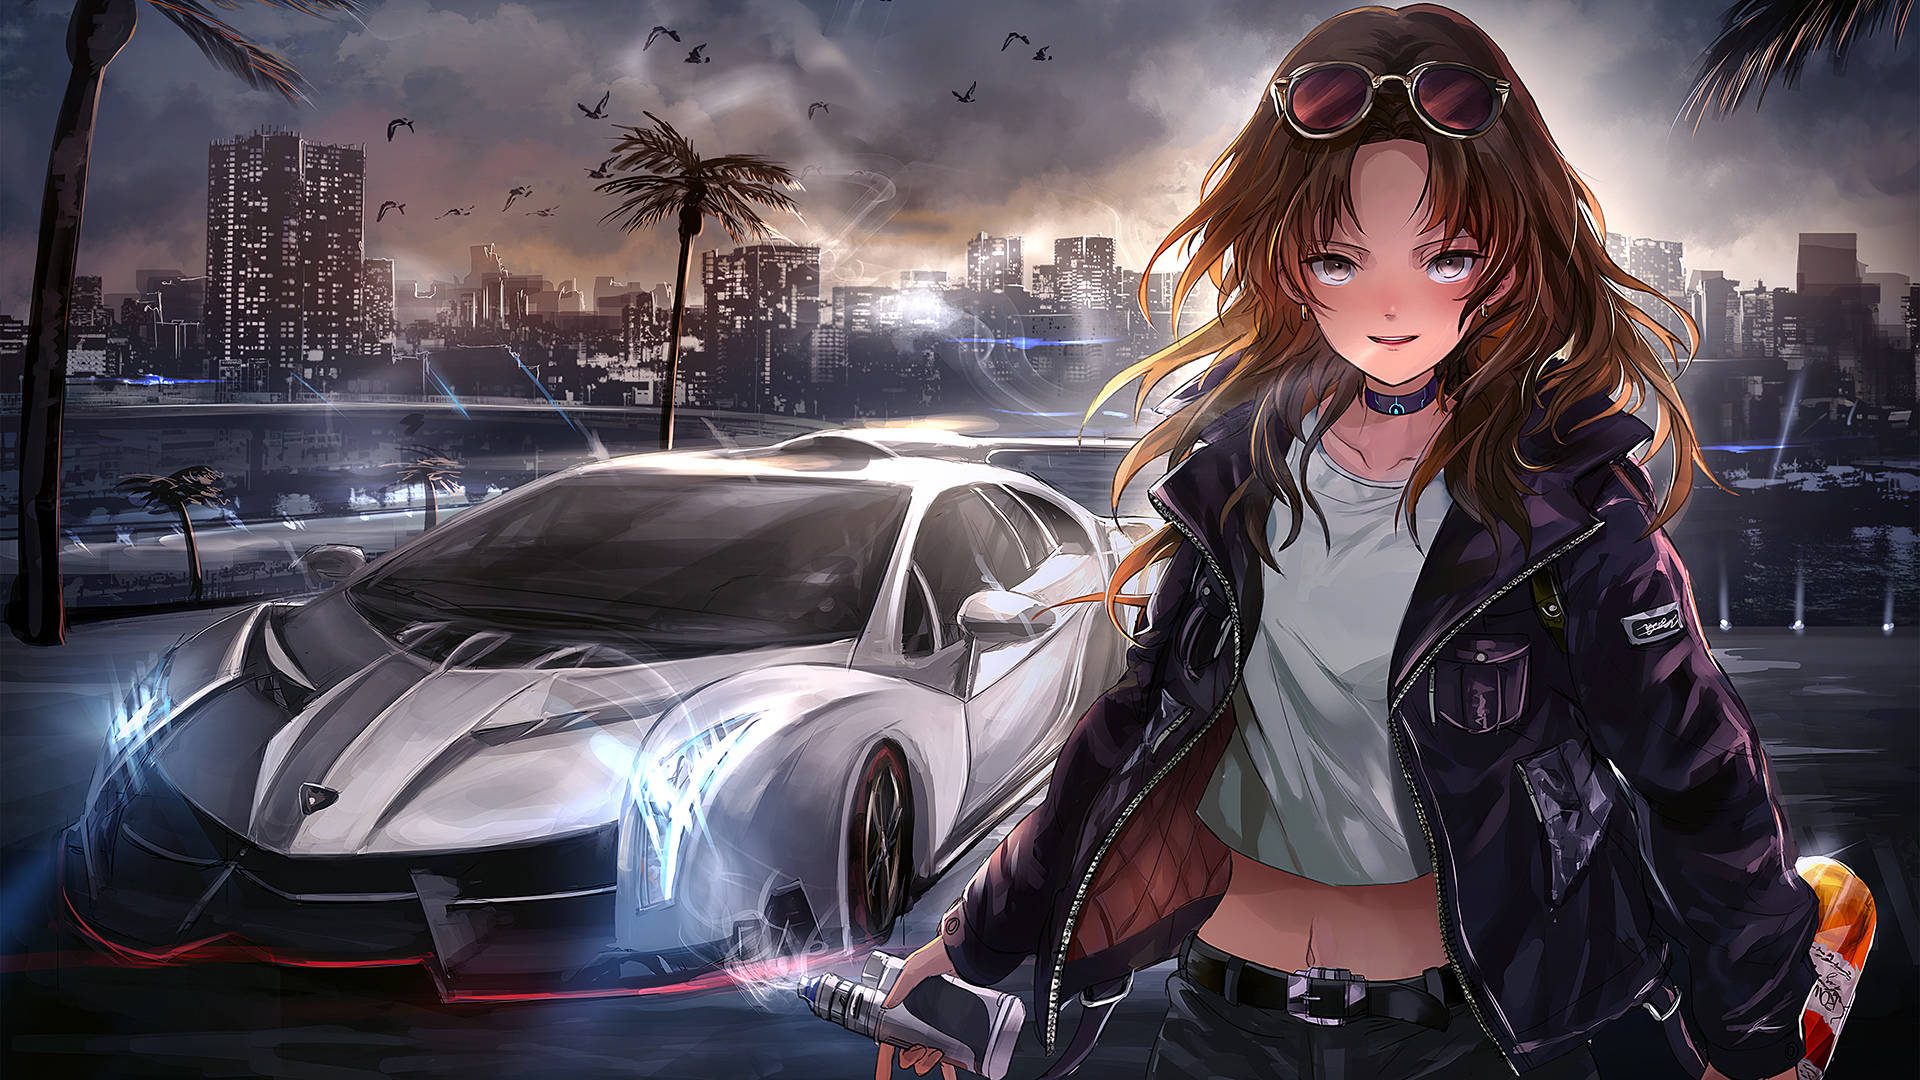 Download Woman With Sunglasses Next To Car Anime Wallpaper 